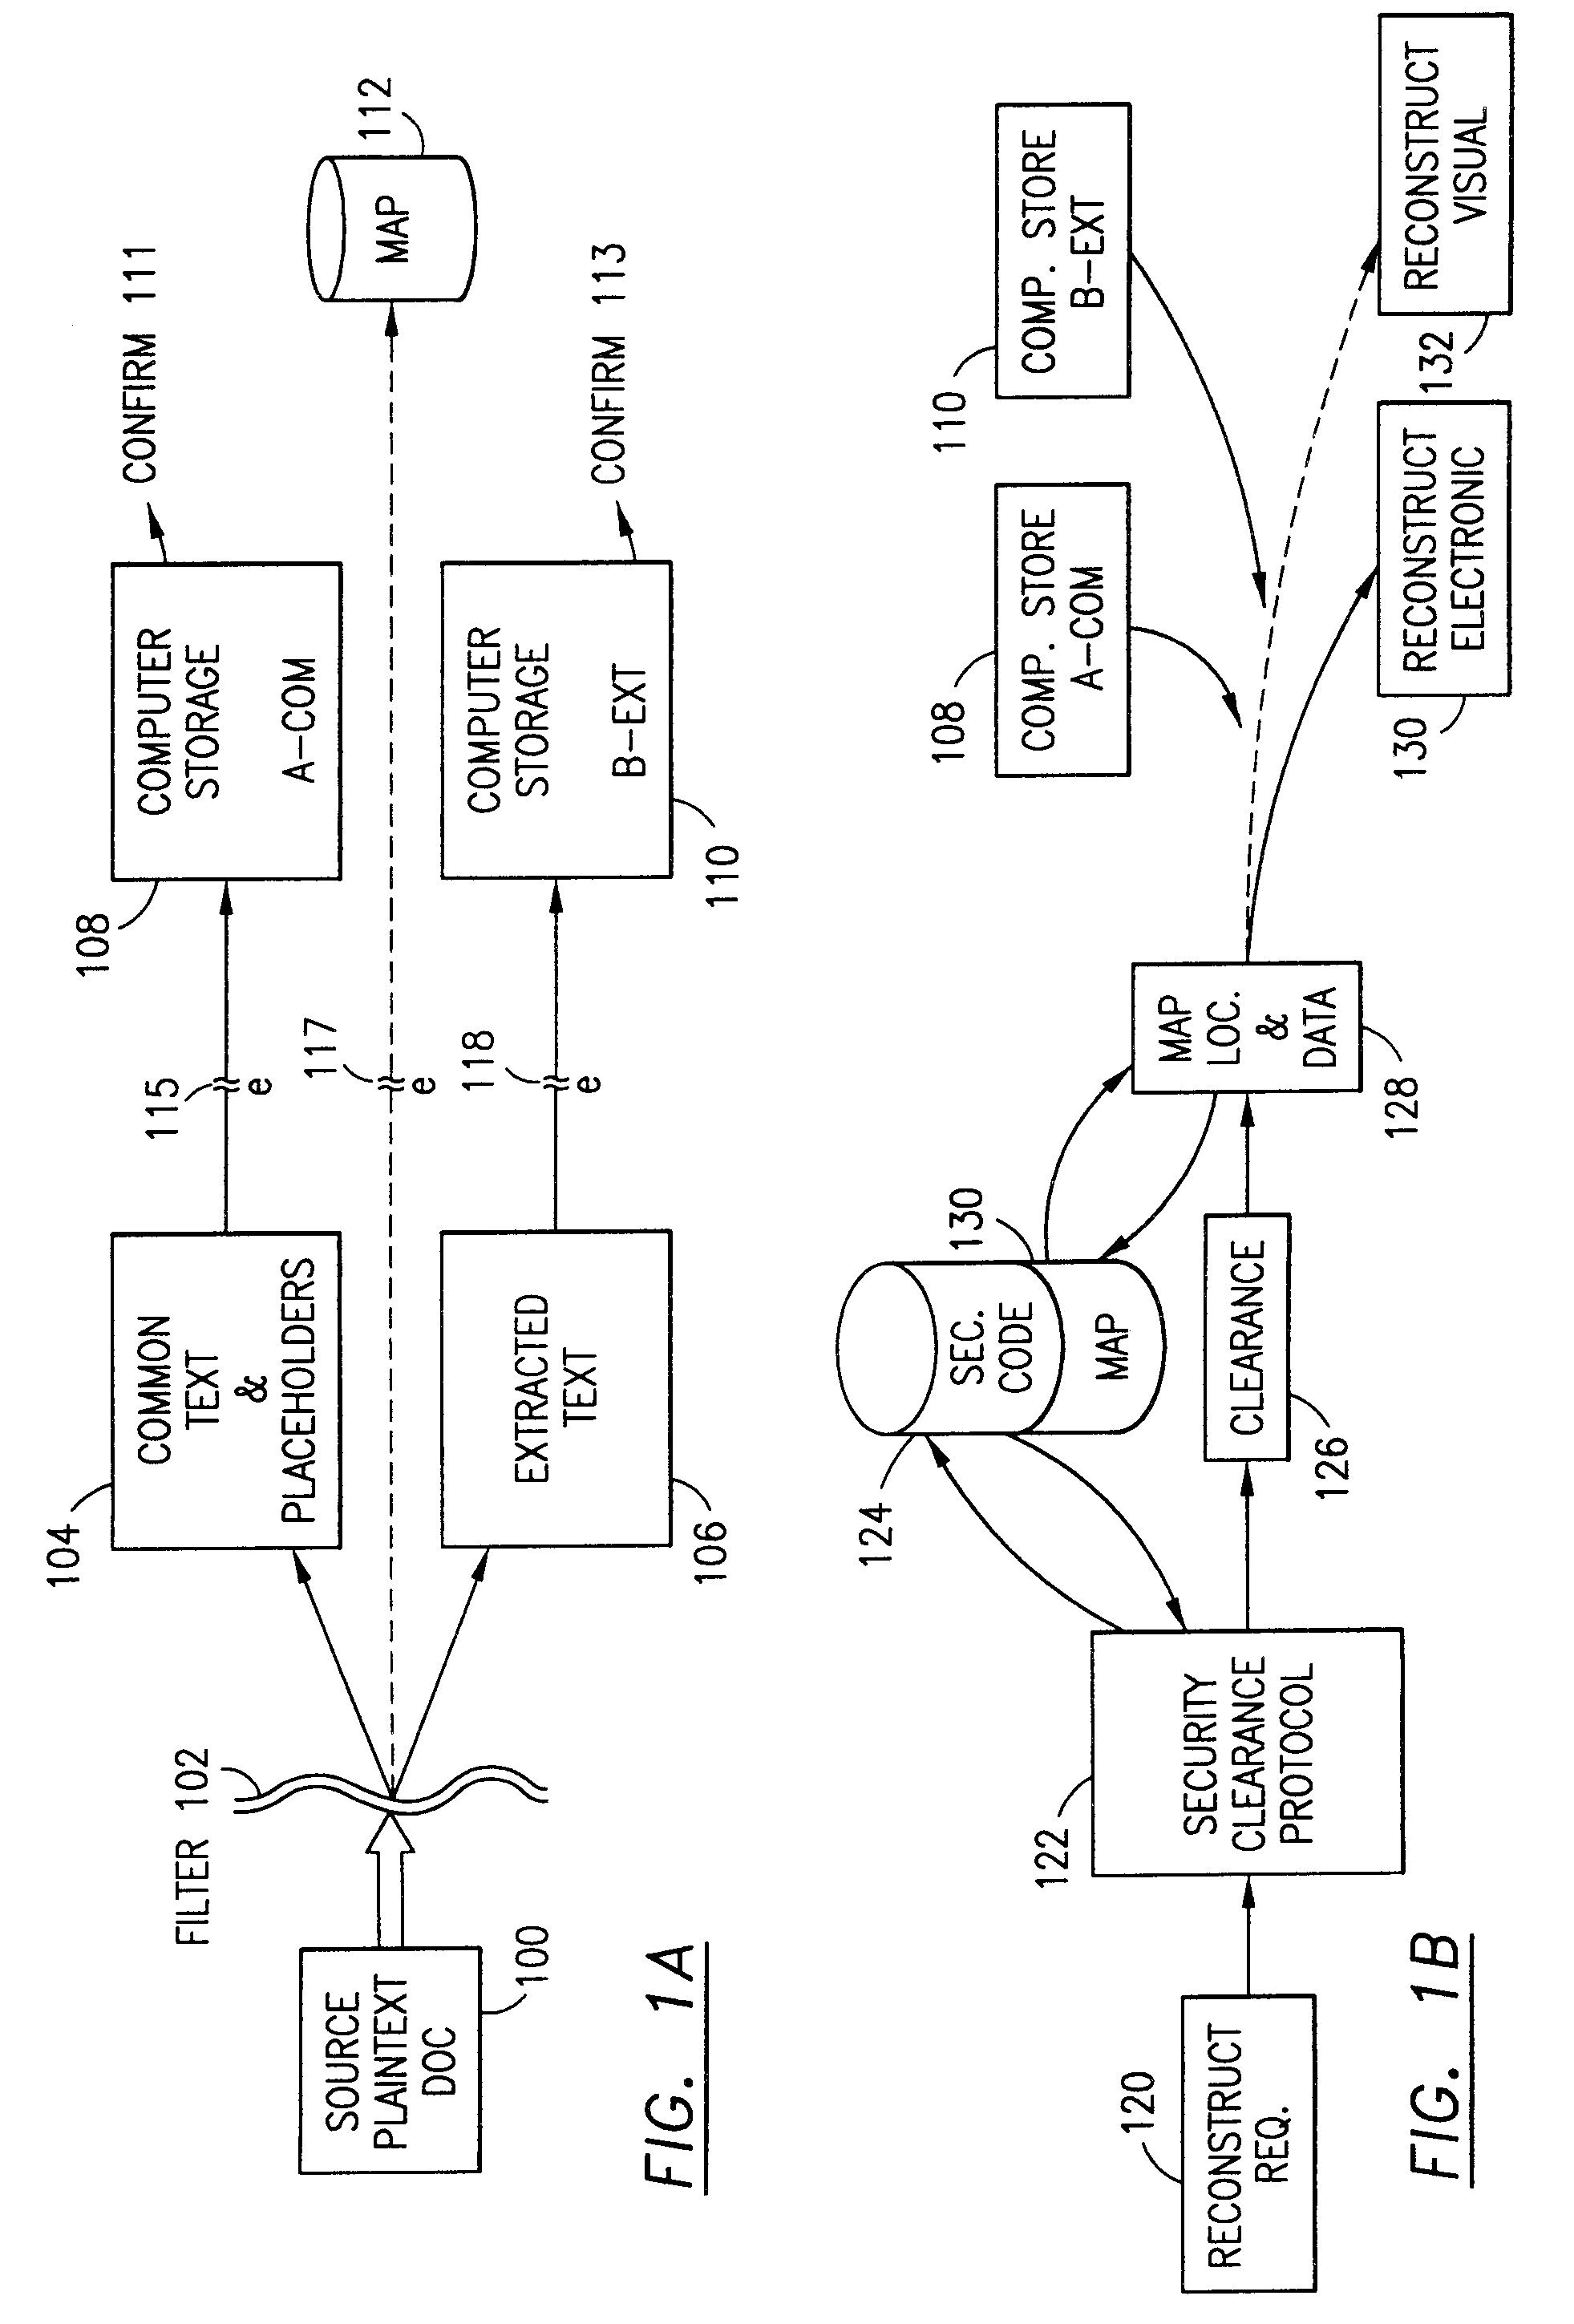 Data security system and method for separation of user communities